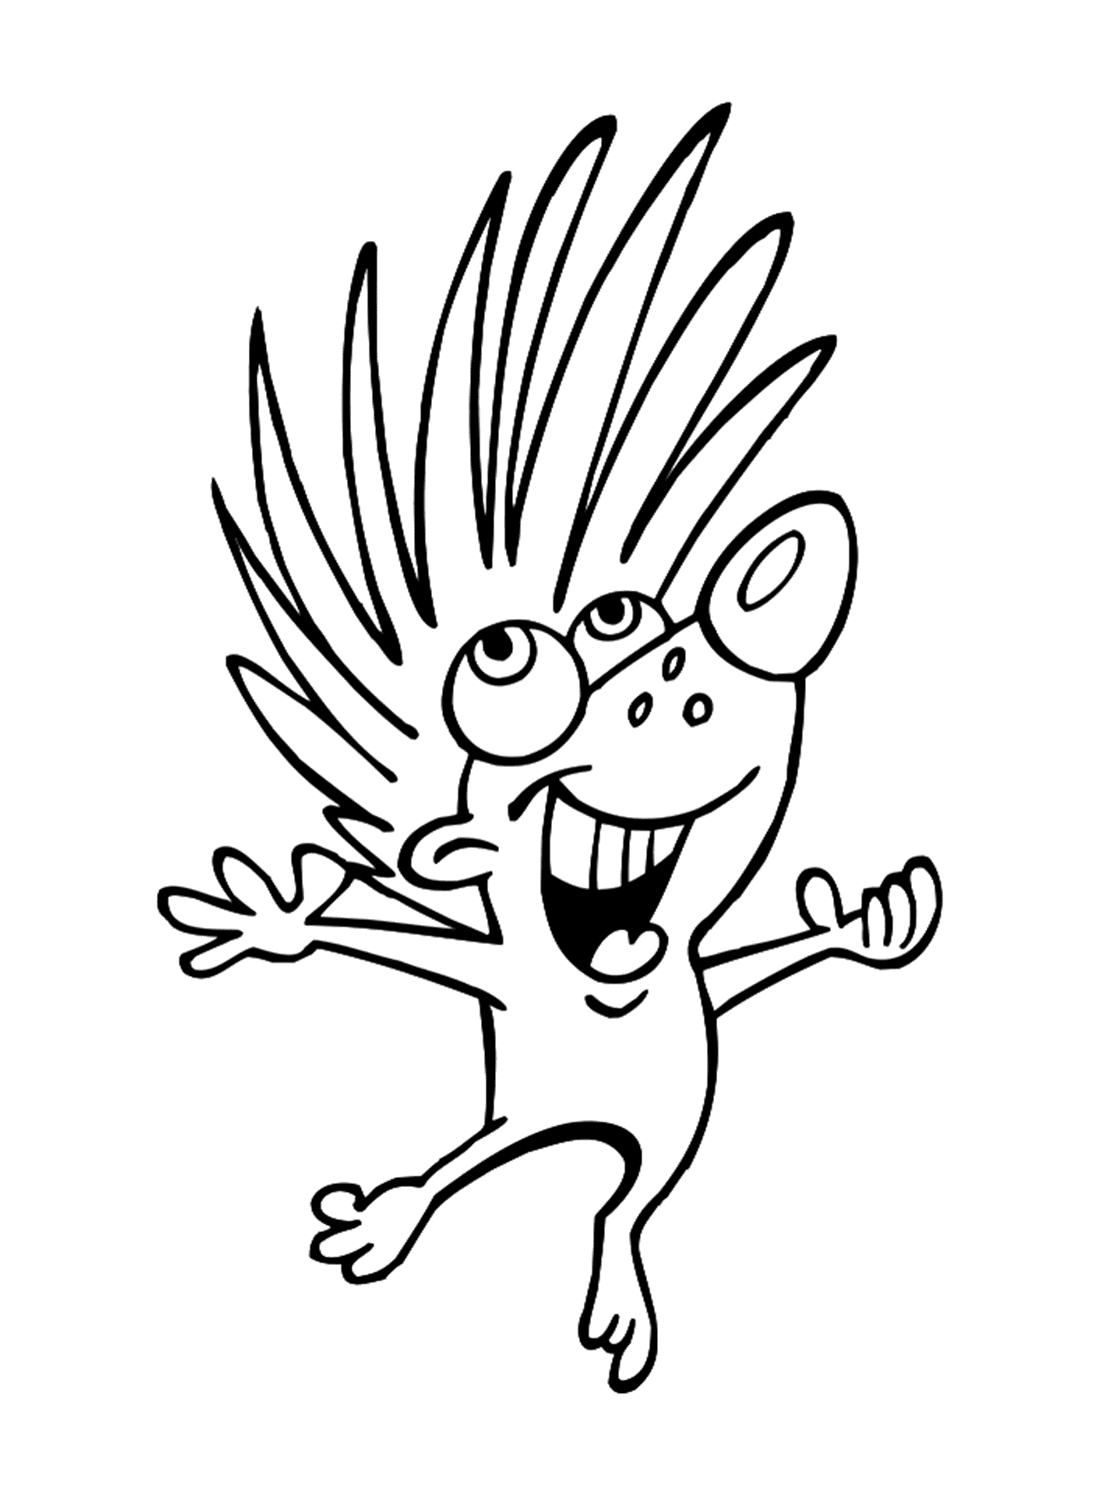 Cute Porcupine Coloring Page For Kids from Porcupine